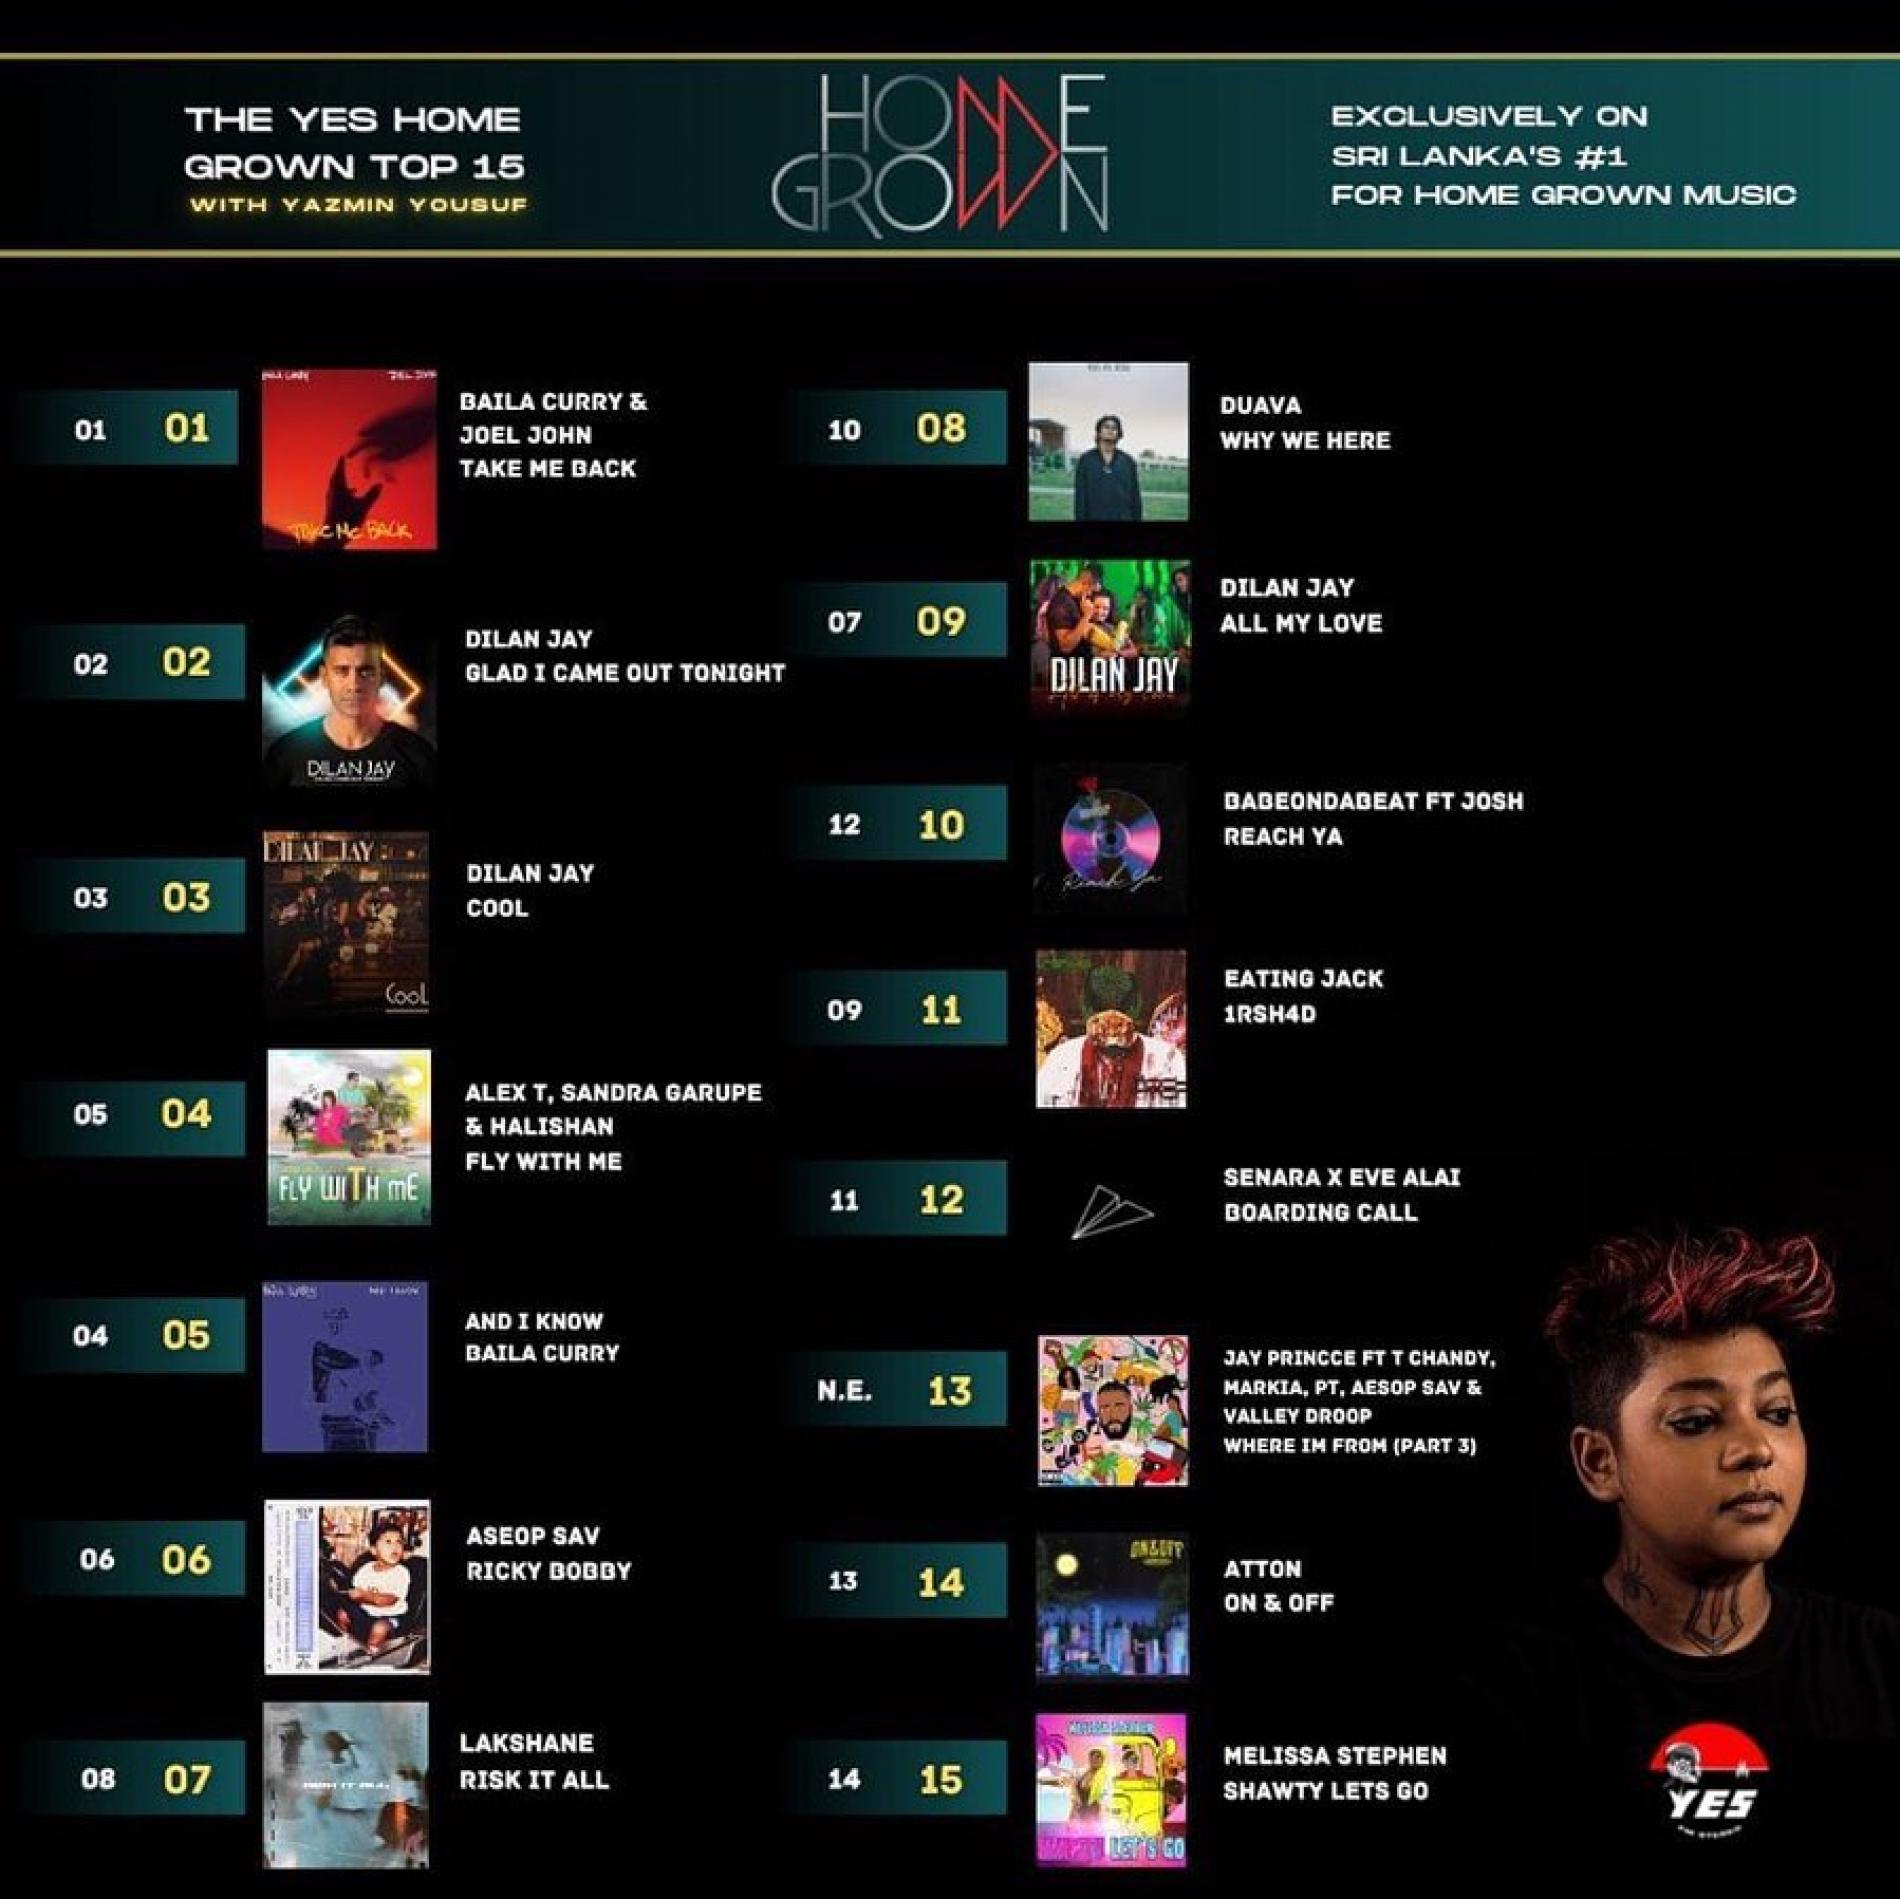 News : Baila Curry & Joel John Stay At Number 1 For 4 Weeks!